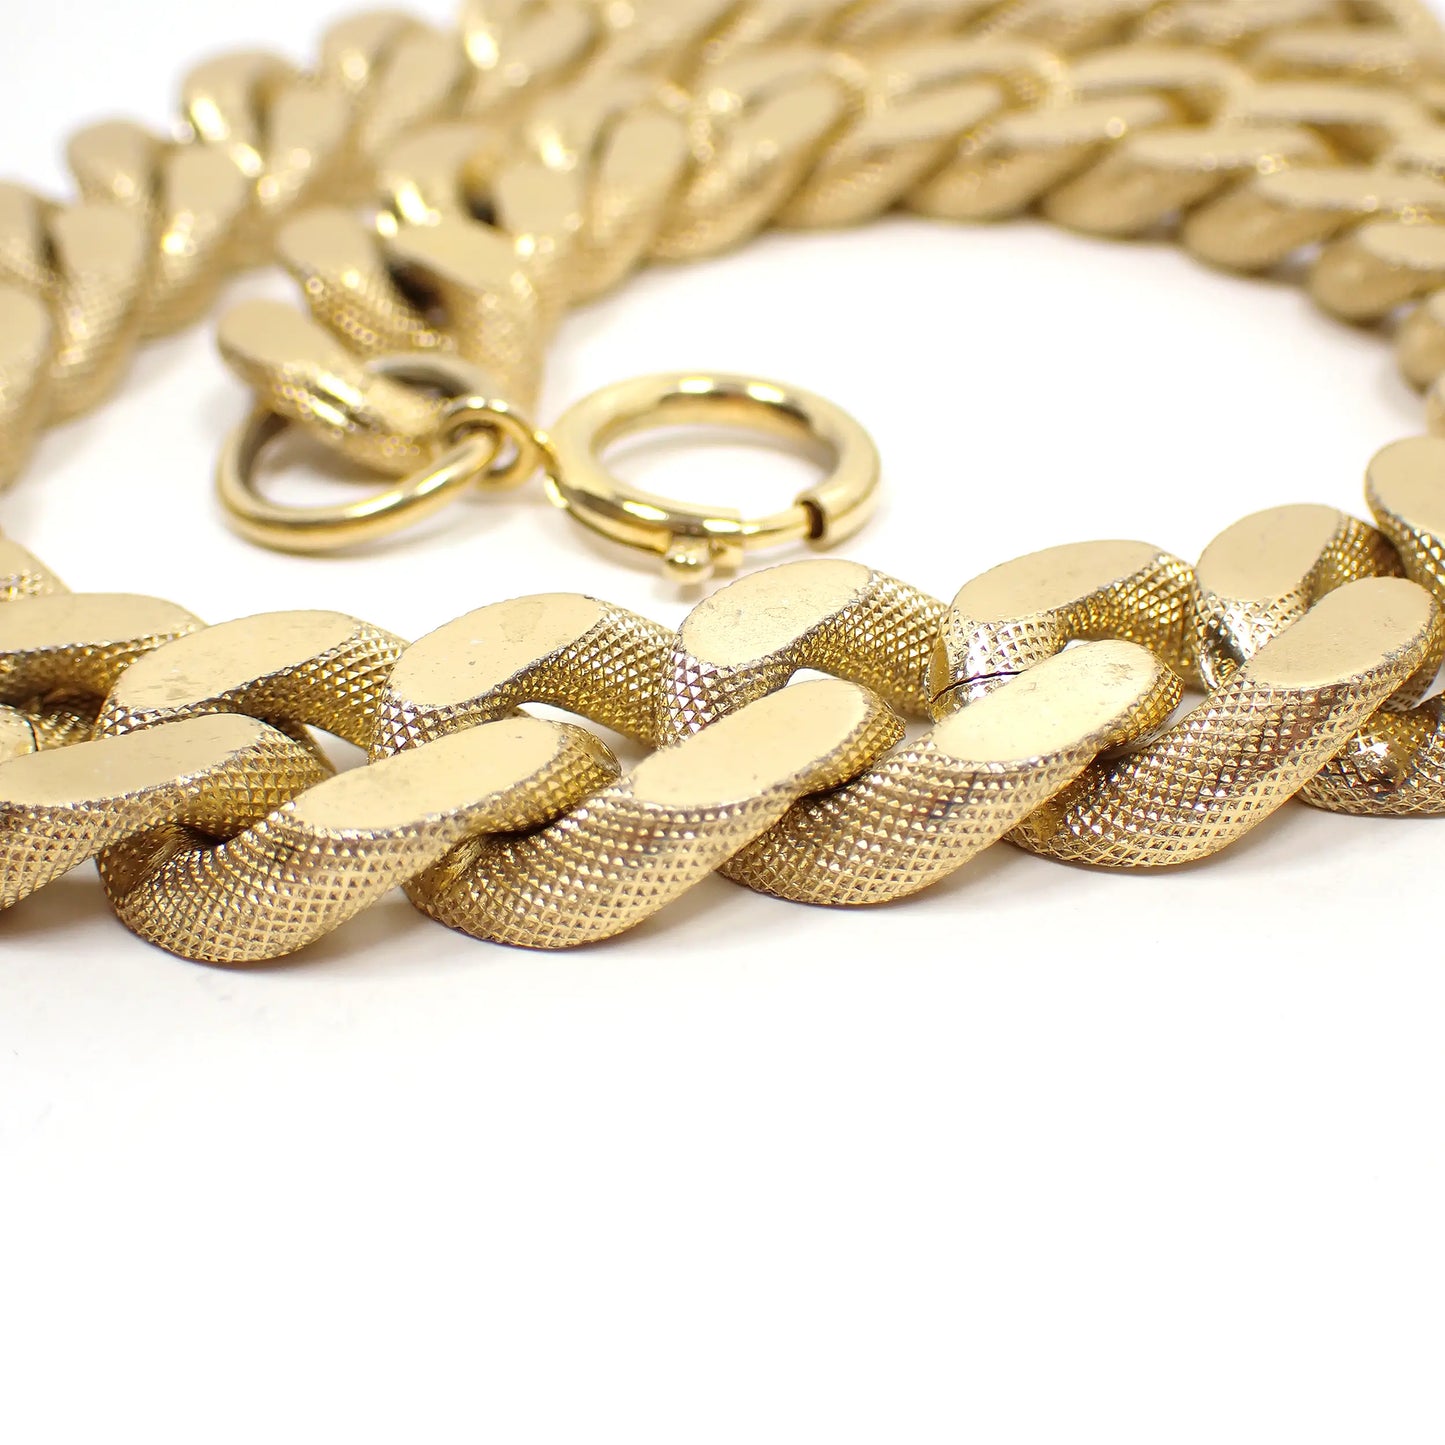 Big Wide Vintage Cuban Link Curb Chain Necklace, Textured Gold Tone Plated Aluminum Links, Hip Hop Jewelry